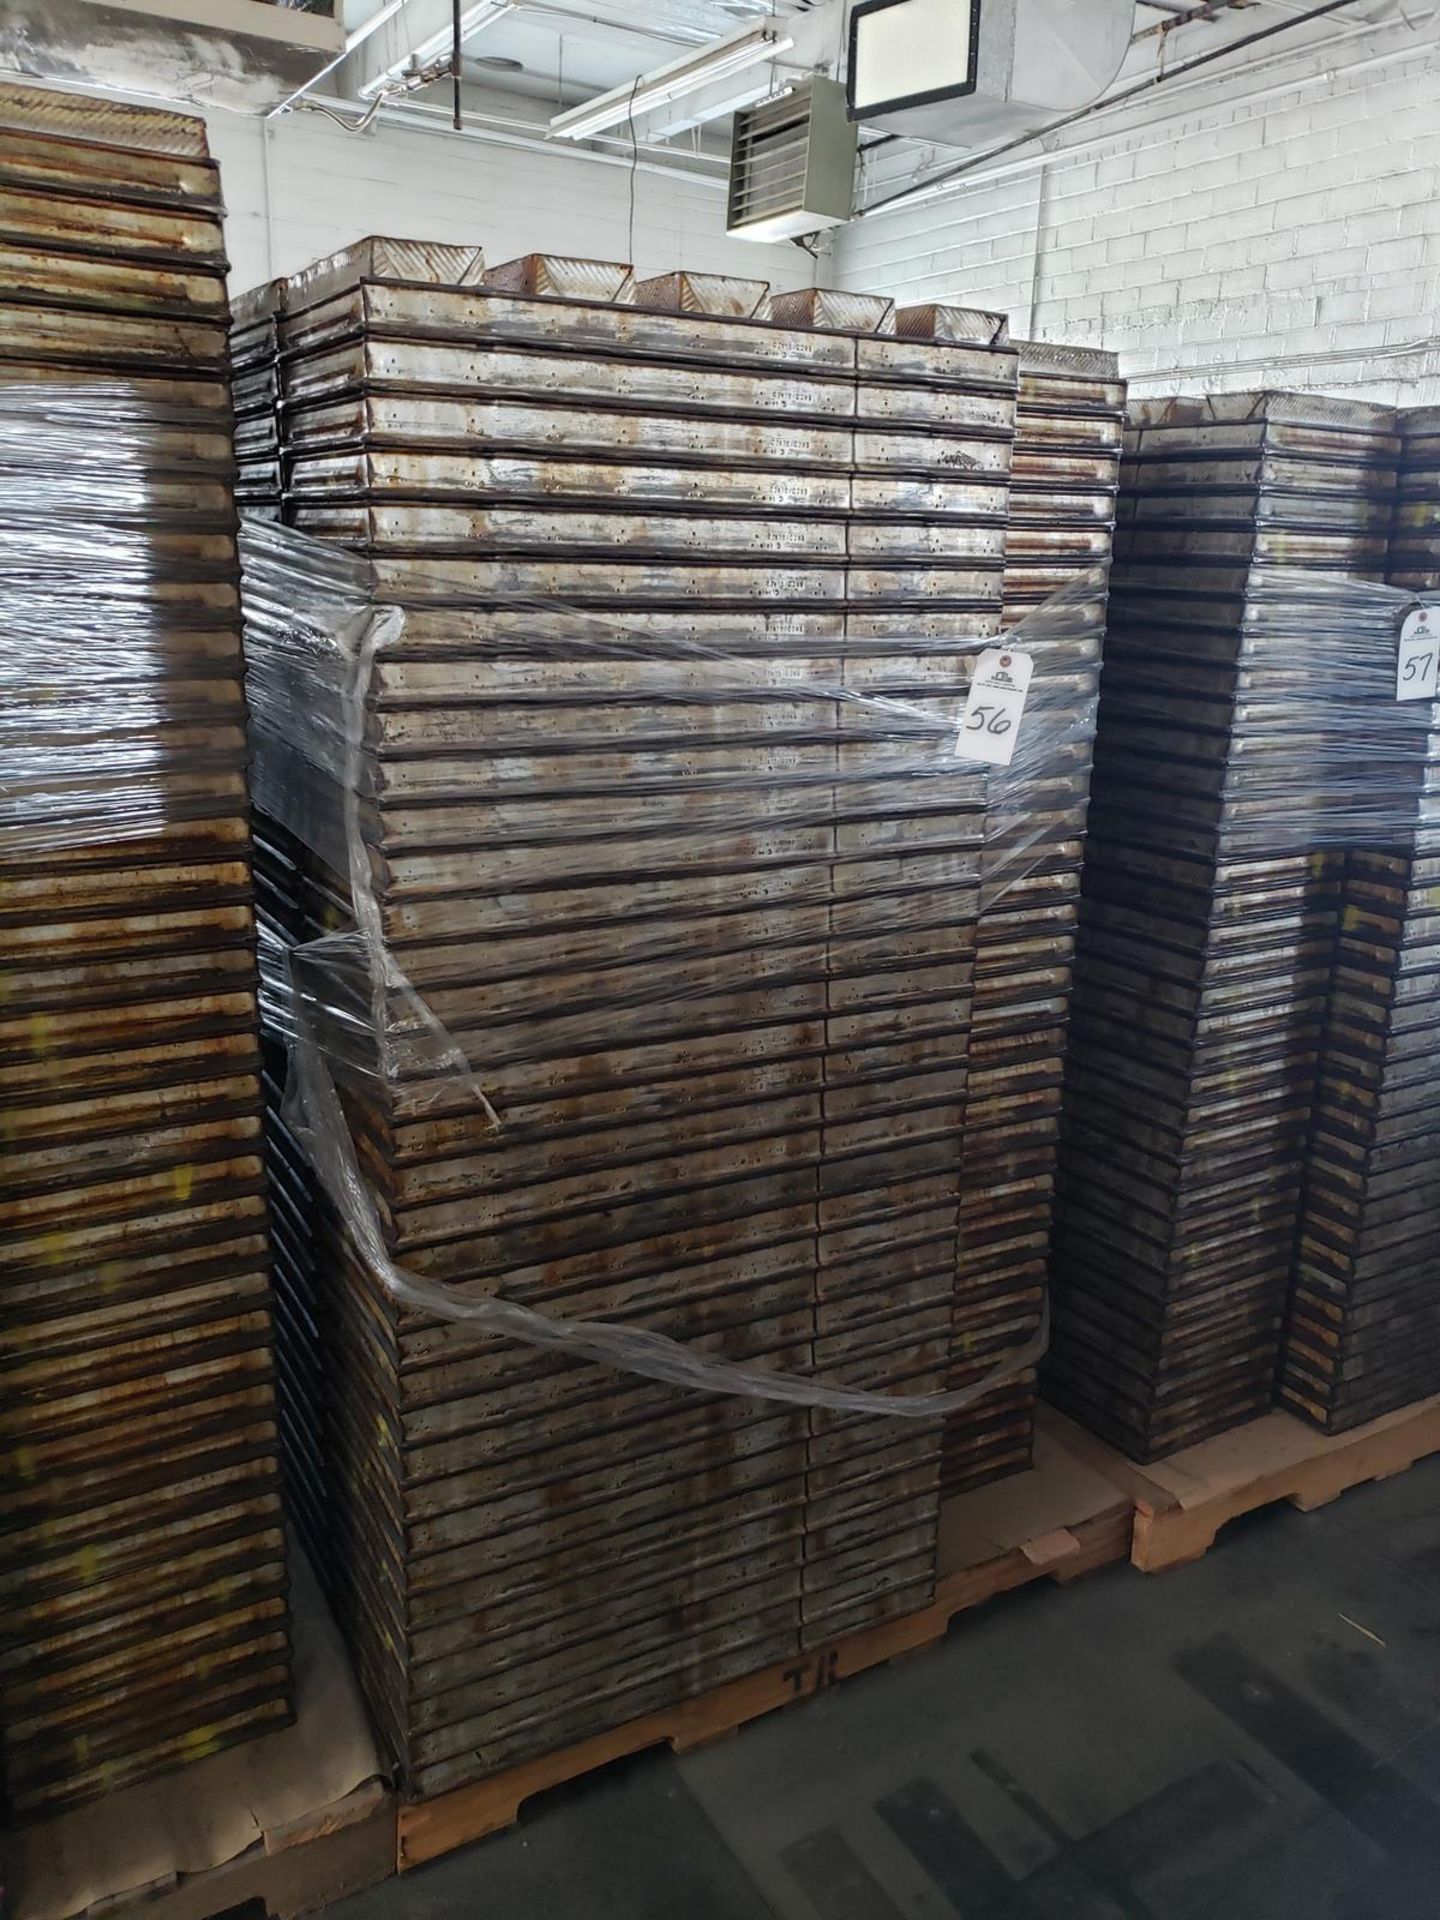 Lot of approx. 140 4 1/2" X 12" 5 Strap Bread Baking Pans | Rig Fee: $100